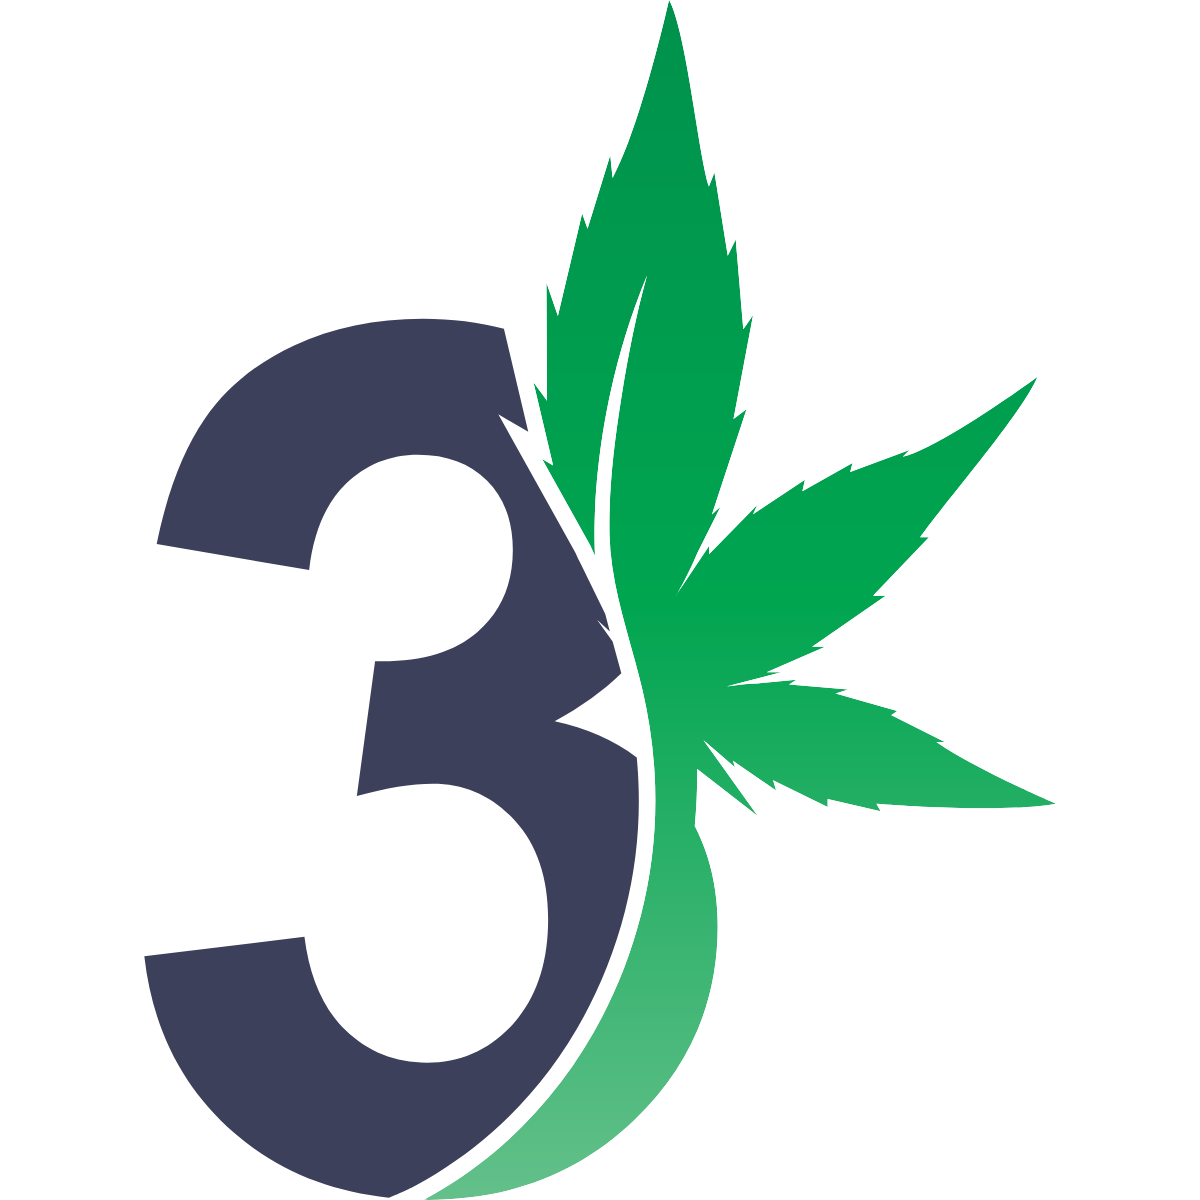 The number three fused with a cannabis leaf